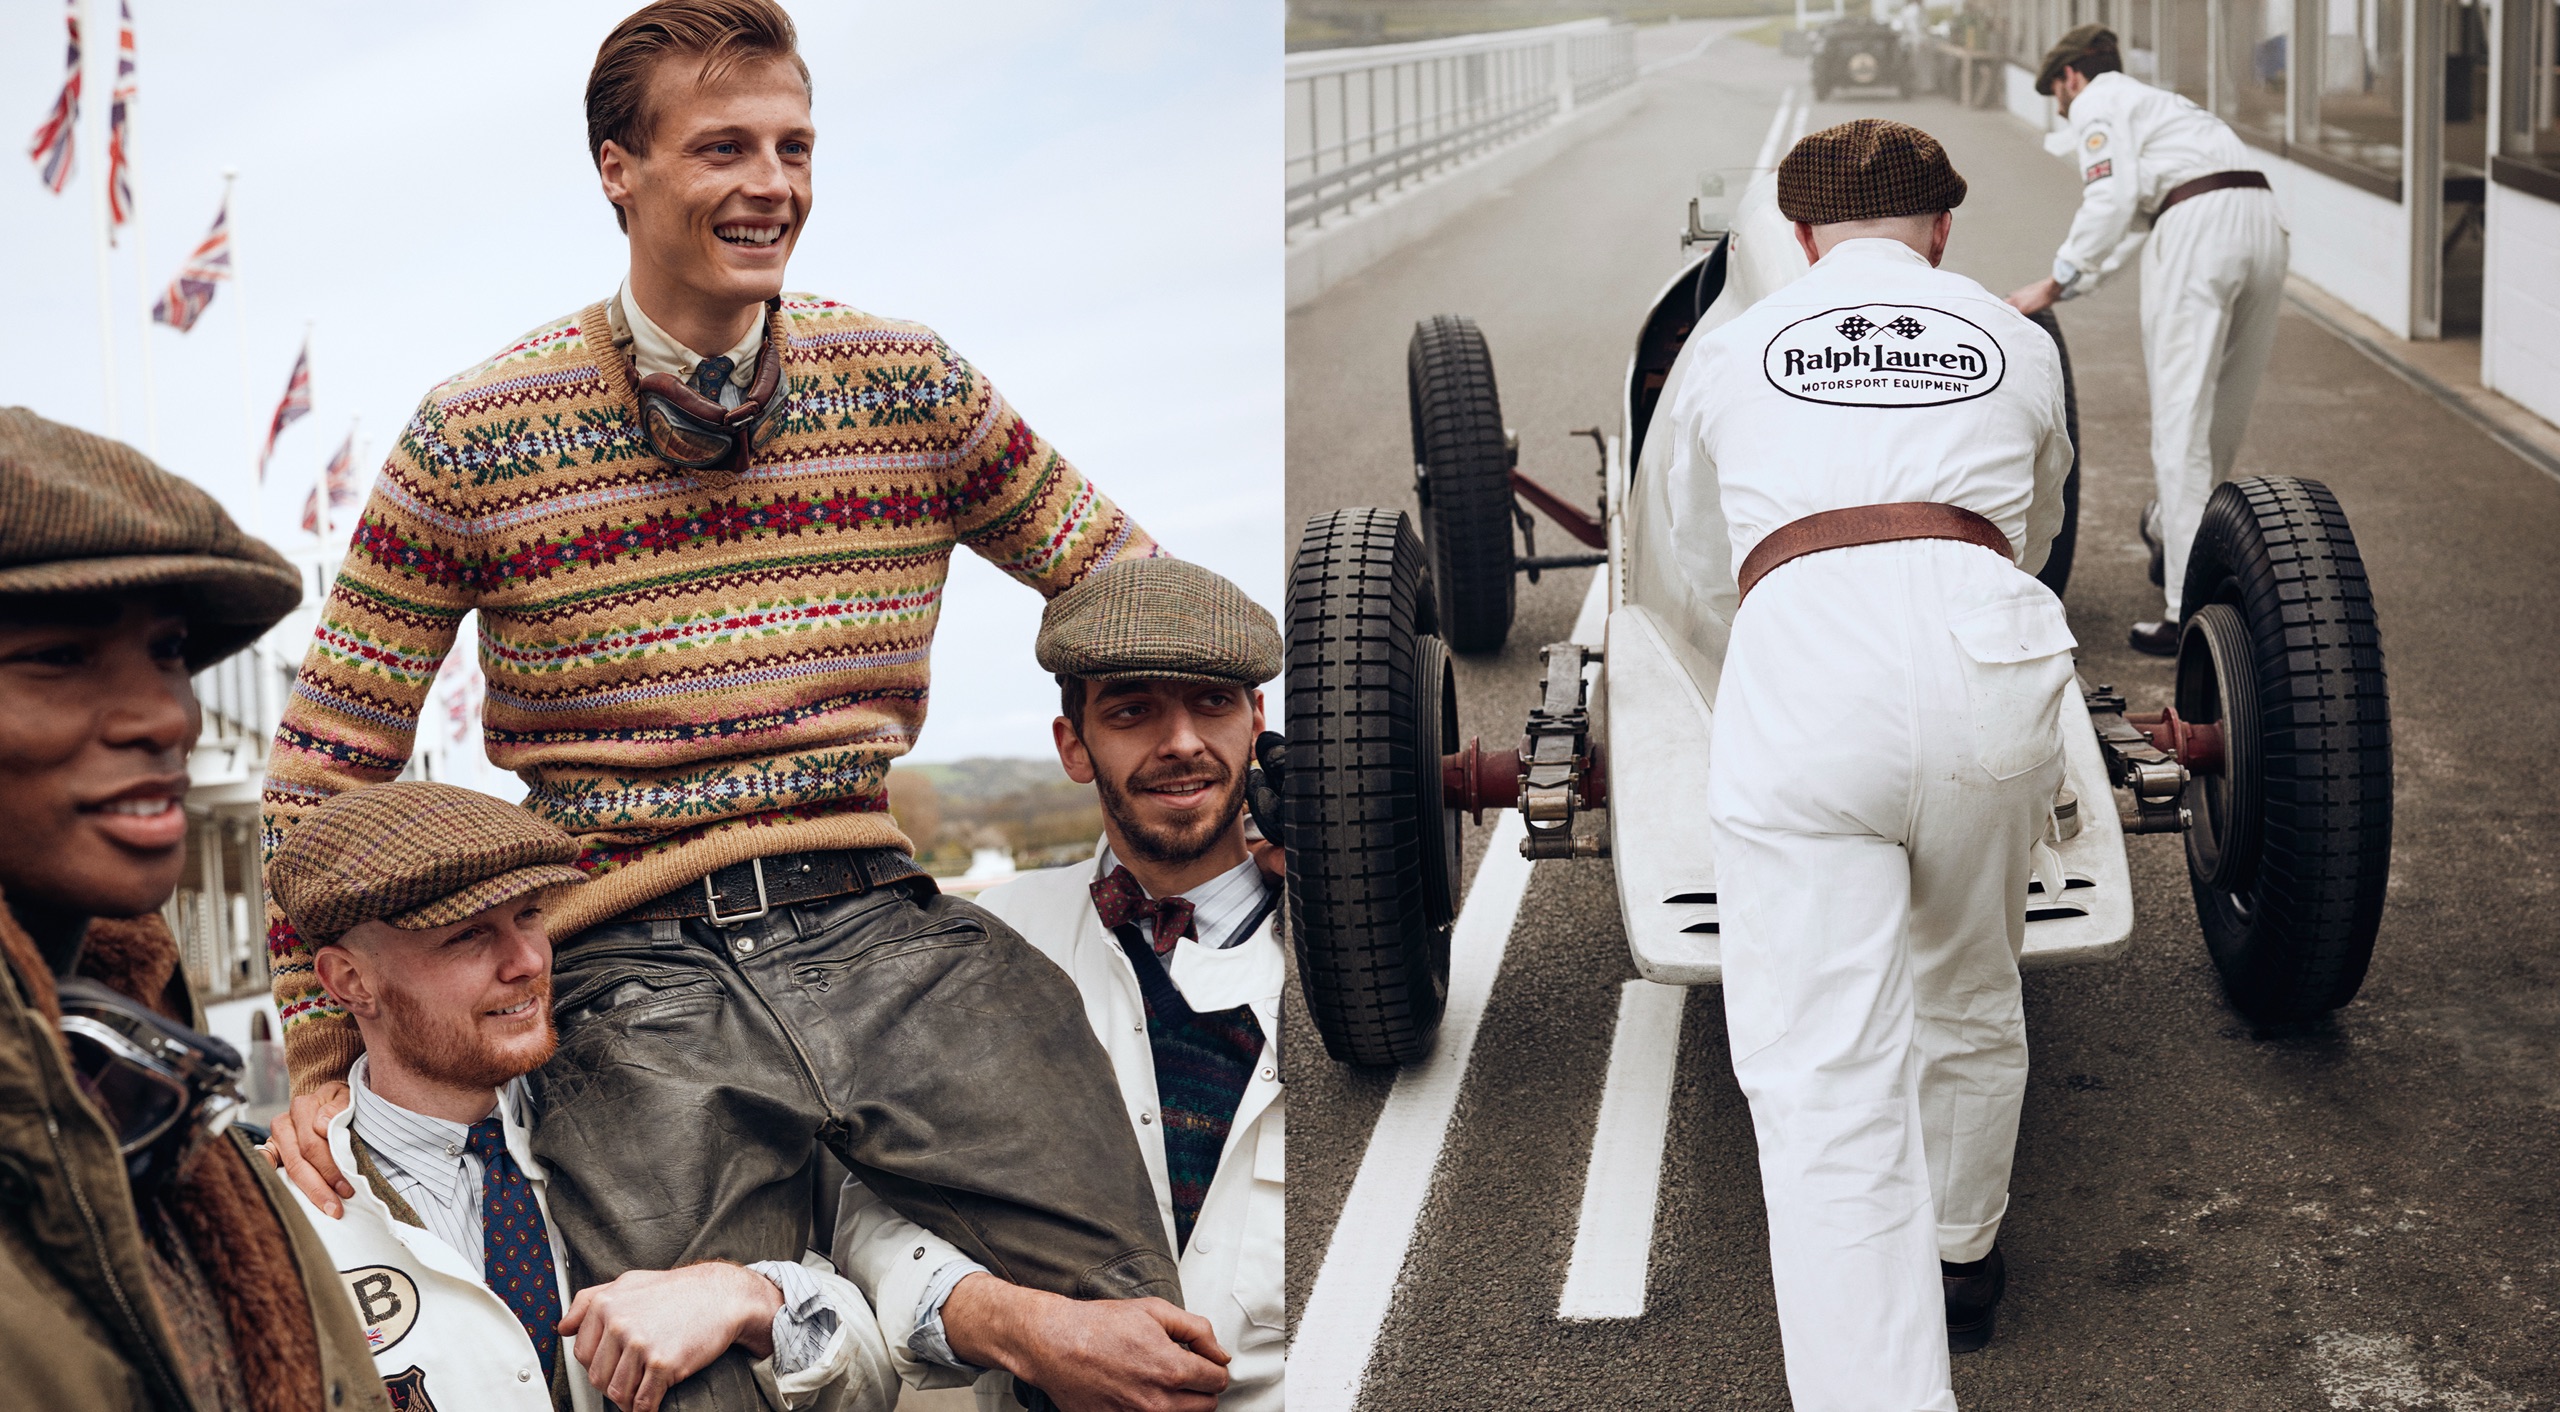 <strong>ON LOCATION</strong><br/><span>This season of Polo Originals, inspired by the golden era of Grand Prix car racing, was photographed at the Goodwood Motor Circuit, which is located in West Sussex, on the 12,000-acre Goodwood Estate. The Circuit has since become known for hosting a number of prestigious motorsport events, including the famous Festival of Speed and Revival.</span> <br/><rlmag_link href="https://www.ralphlauren.com/brands-prl-tough-and-refined-cg"><button class="shop-collection">Shop the Story</button></rlmag_link>